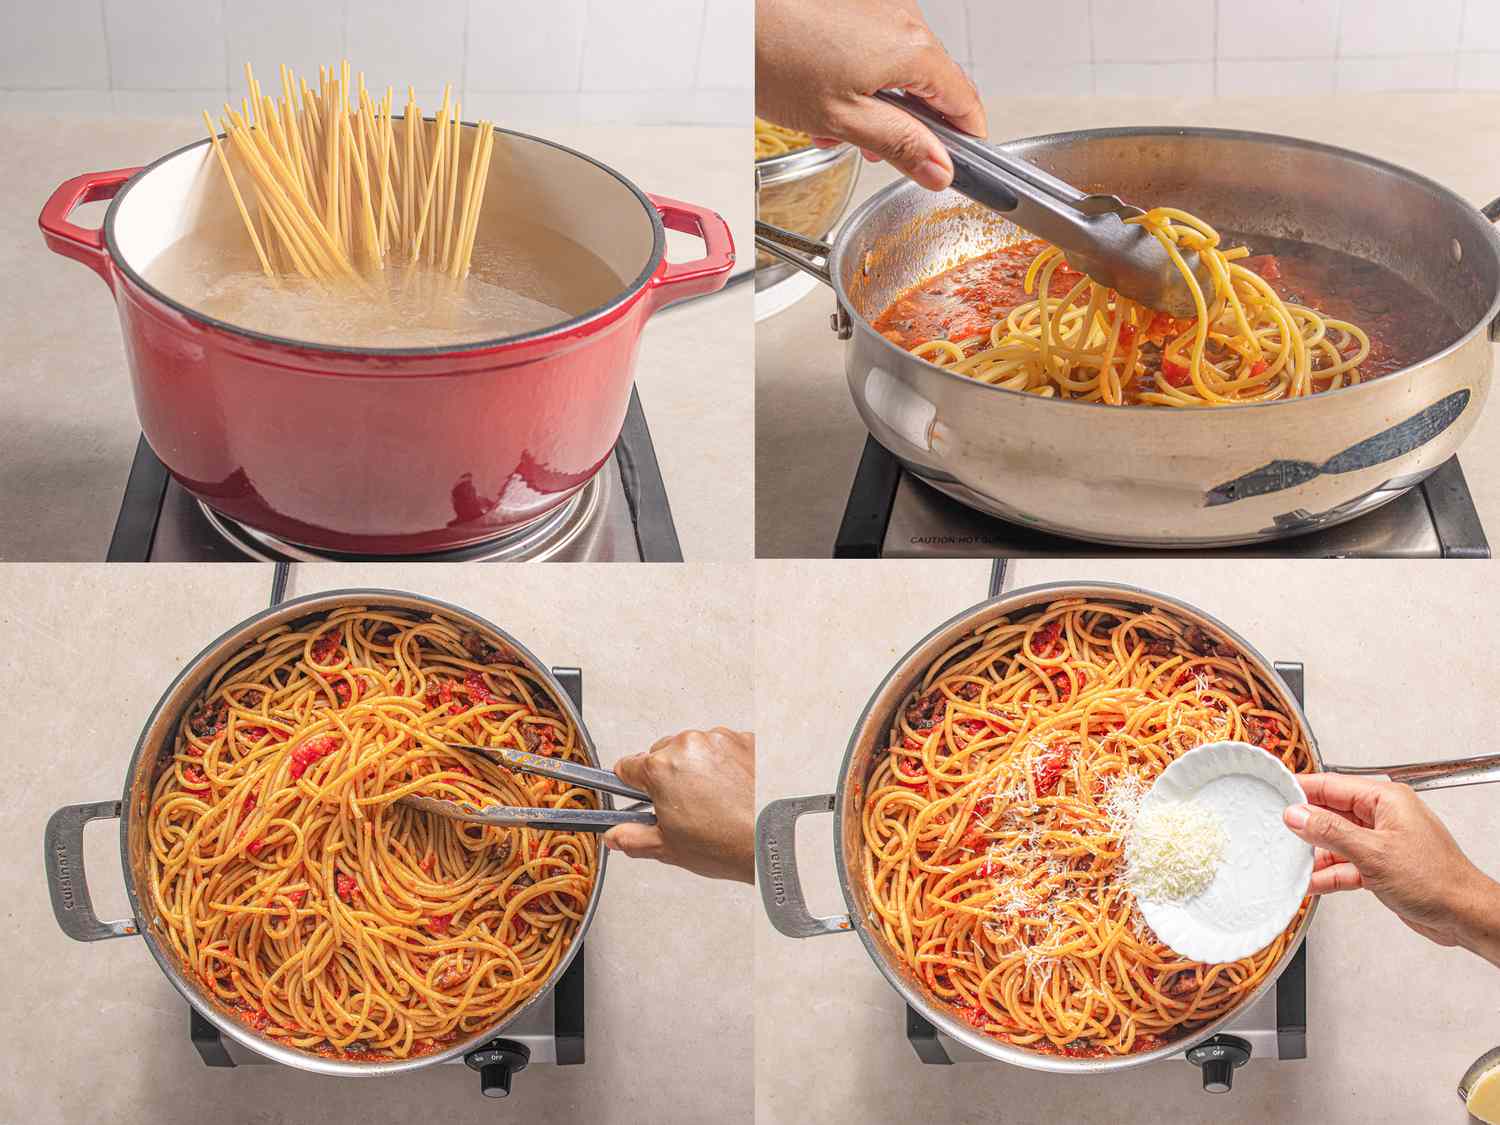 Four image collage of cooking pasta, adding it to sauce, stirring and adding cheese